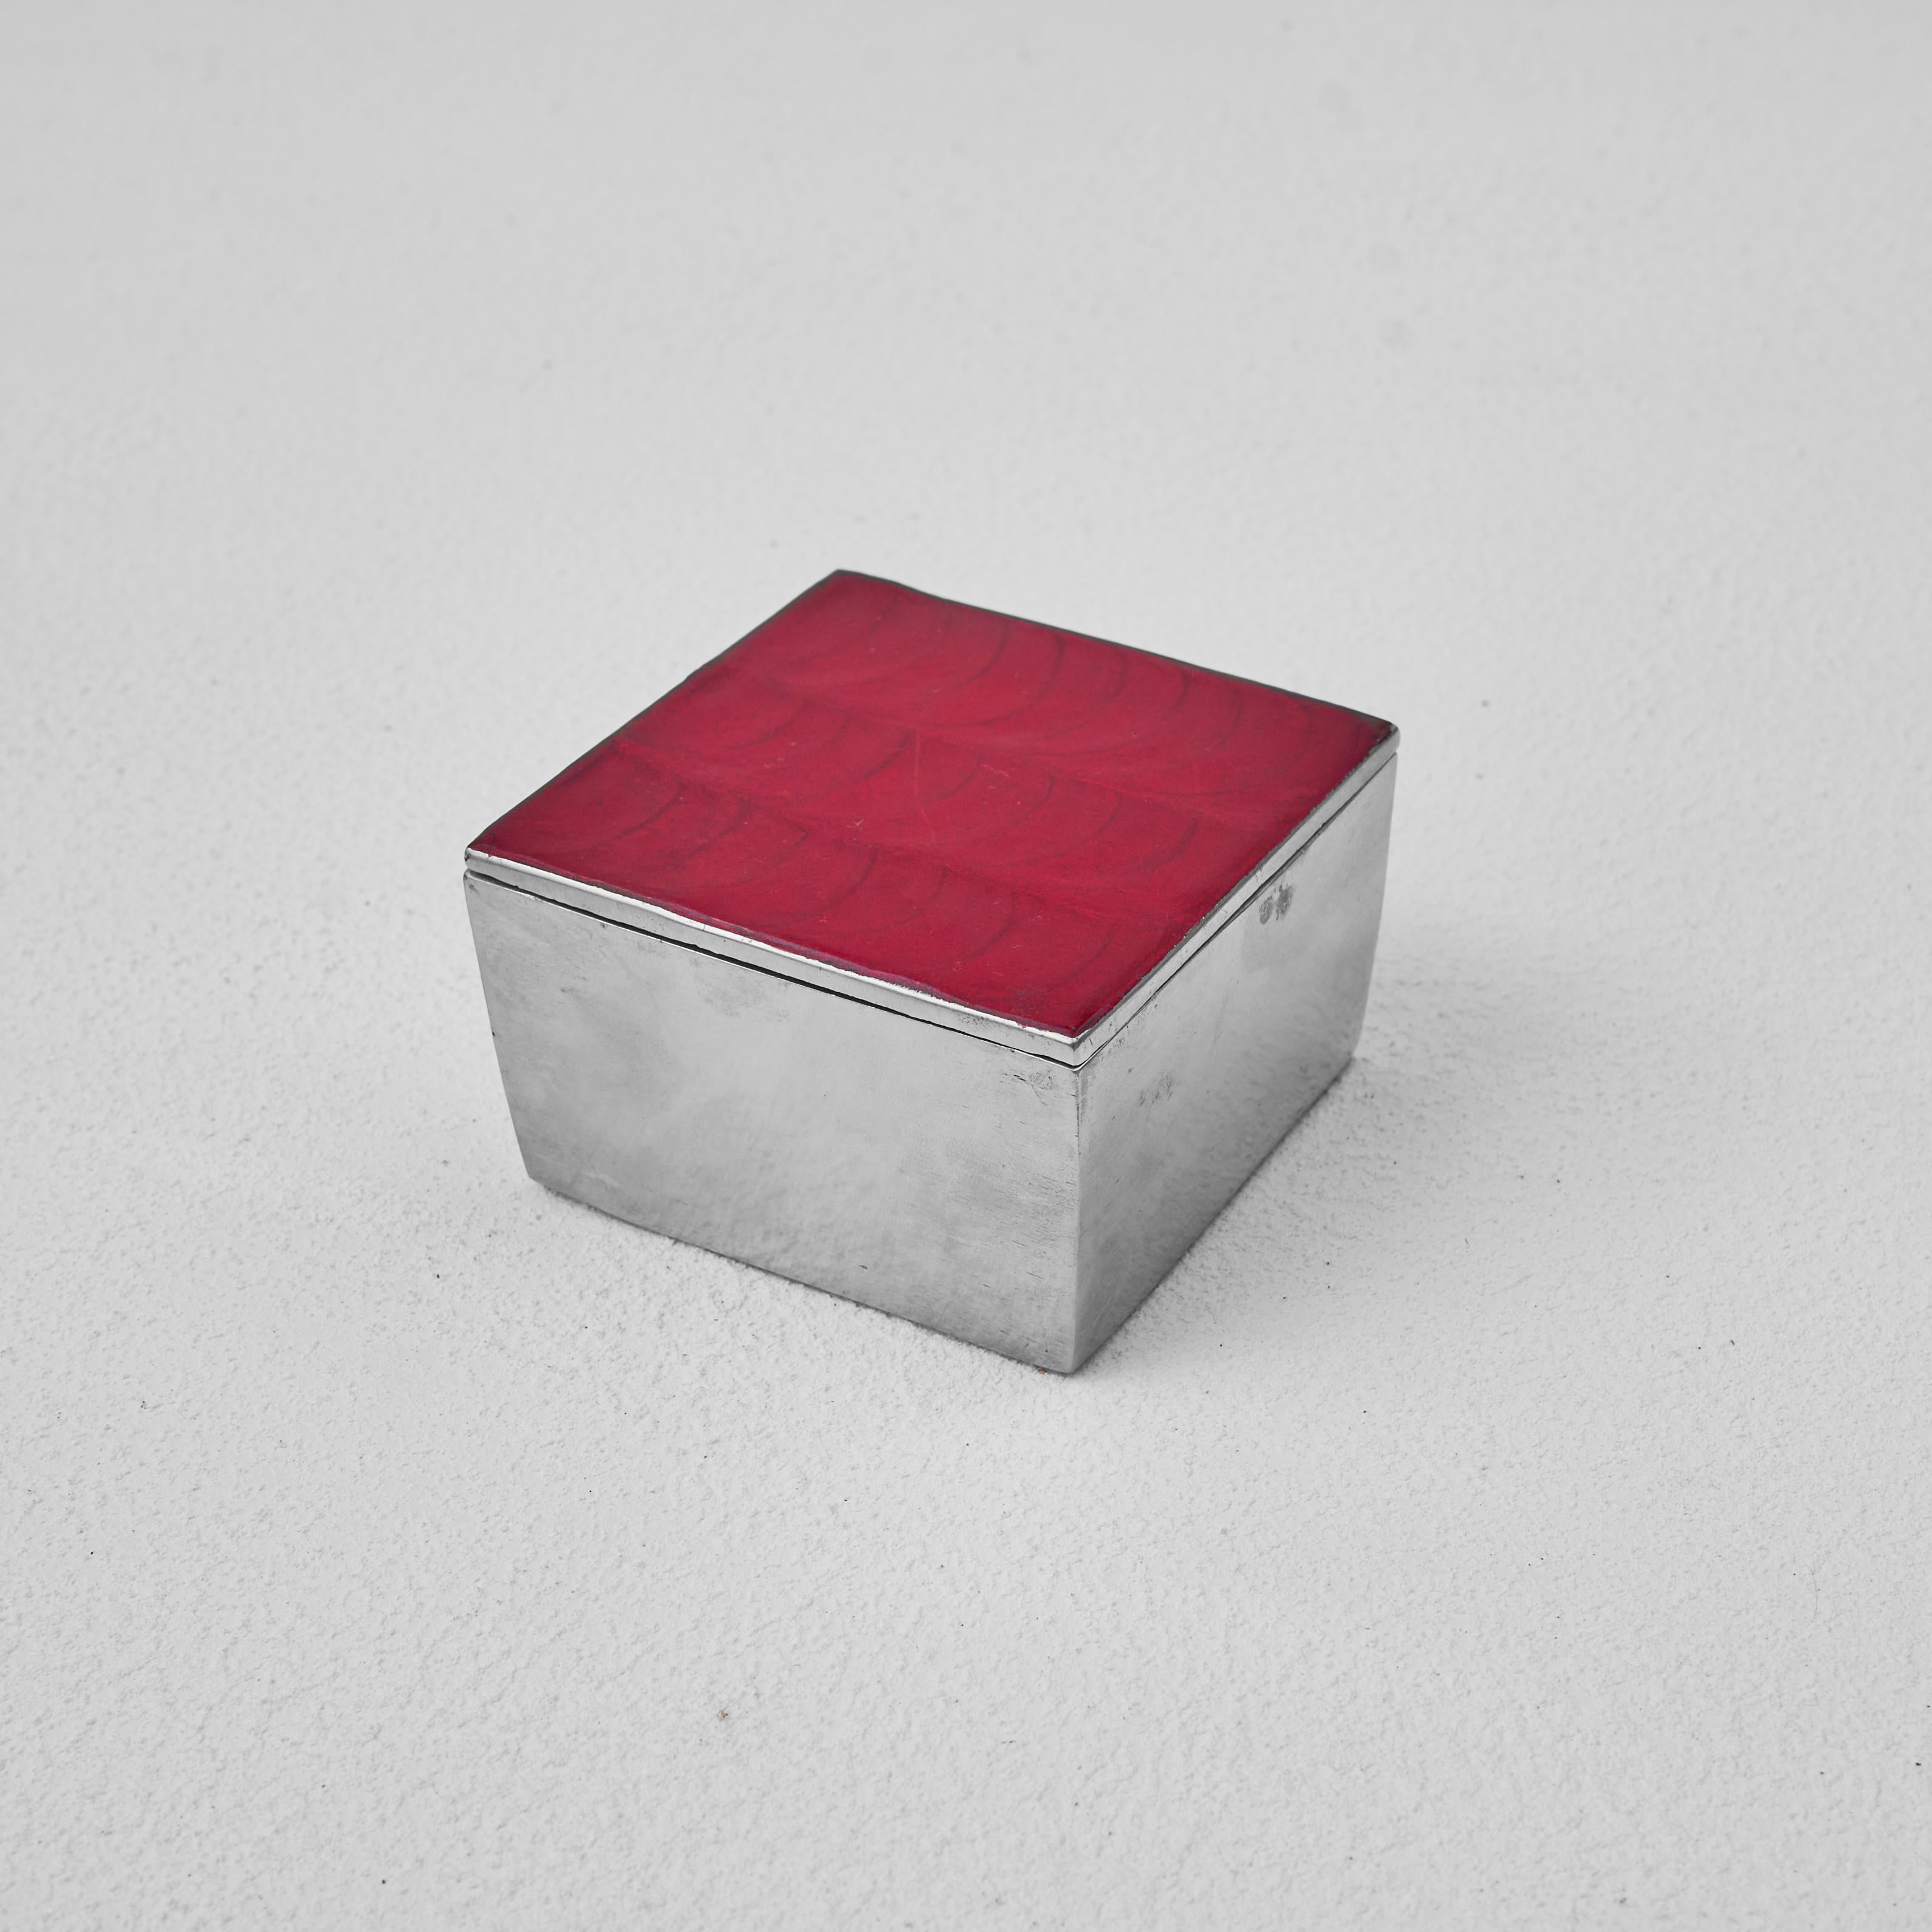 Trinket Box in Cast Aluminium and Enamel 1960s.

Beautiful and elegant trinket box in cast aluminum and dark red enamel. Great shape with slightly tapered sides and rough casting details. The lid is covered in a very handsome dark red enamel which